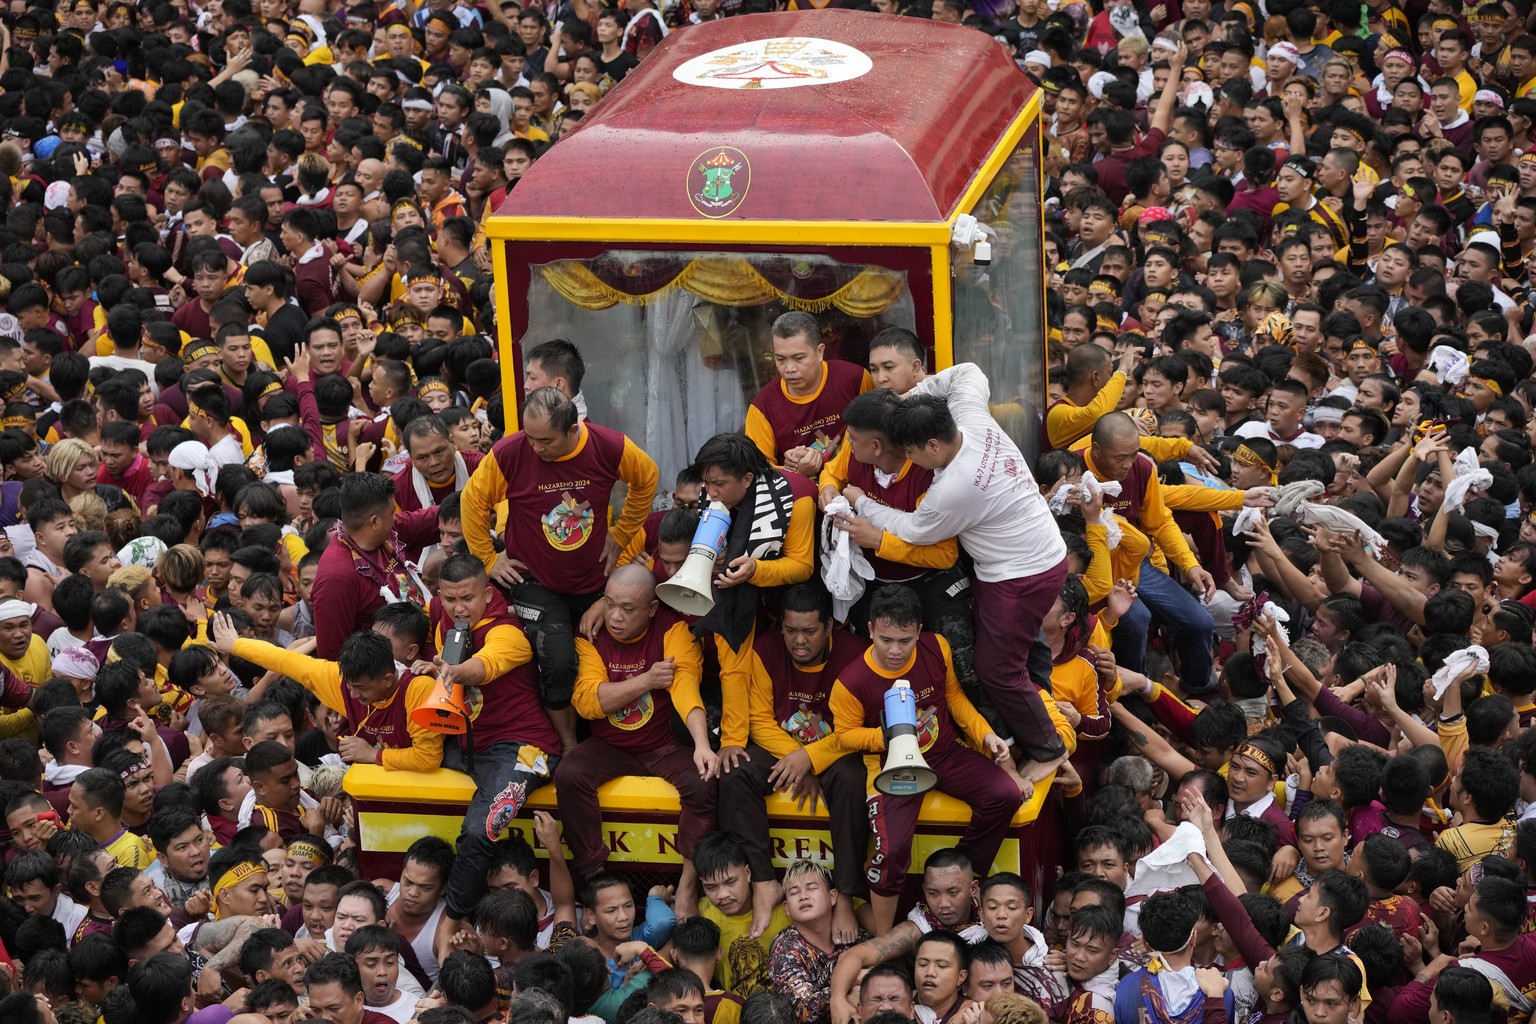 Devotees react as they try to block others from climbing on the glass-covered cart carrying Black Nazarene during its annual procession which was resumed after a three-year suspension due to the coron ...